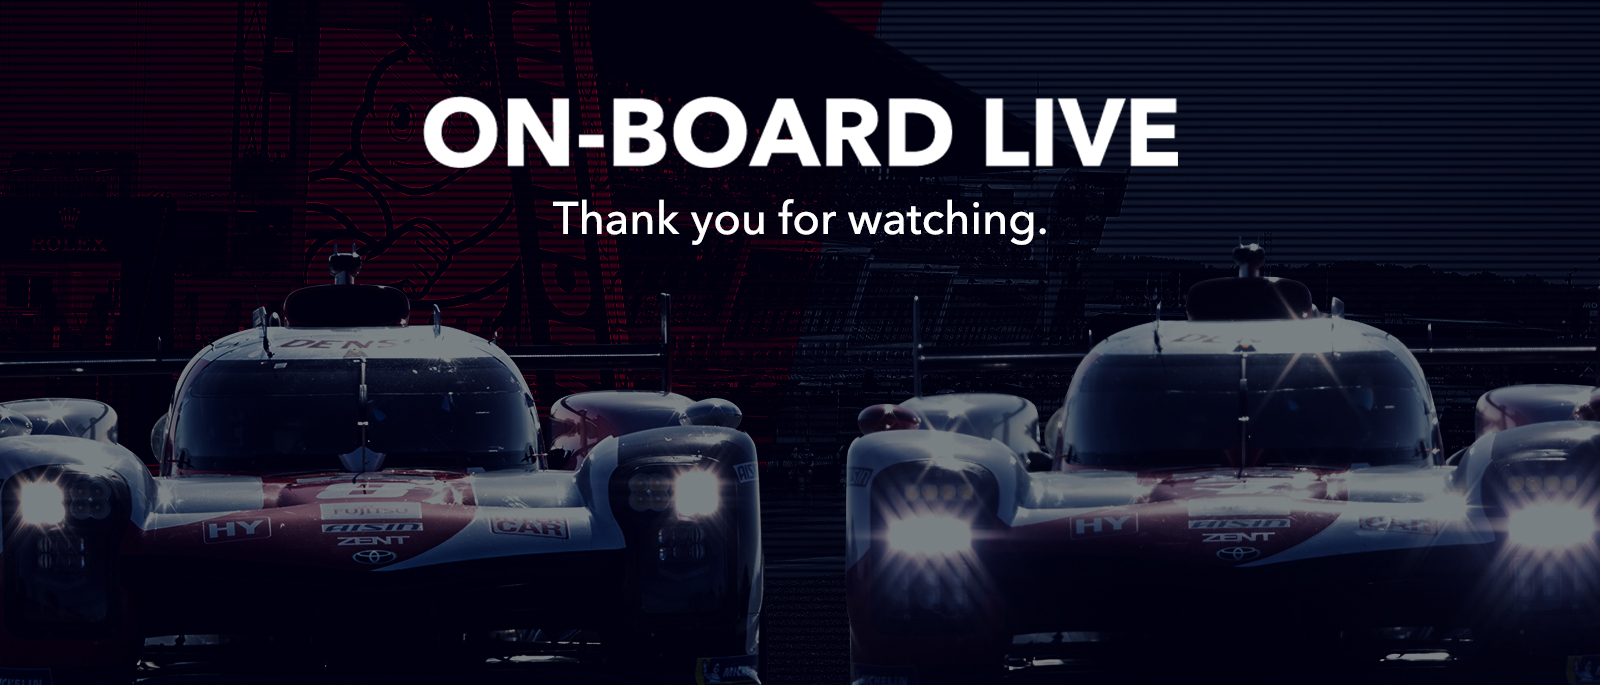 ON=BOARD LIVE